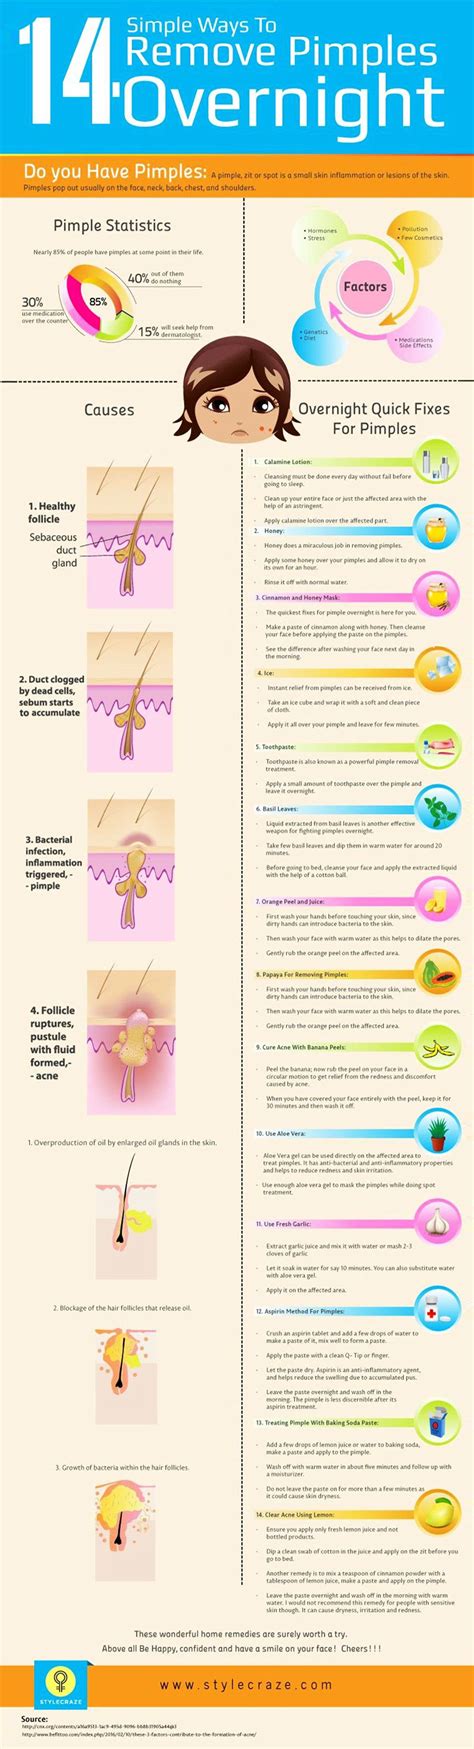 How To Get Rid Of Pimples Overnight Infographic How To Remove